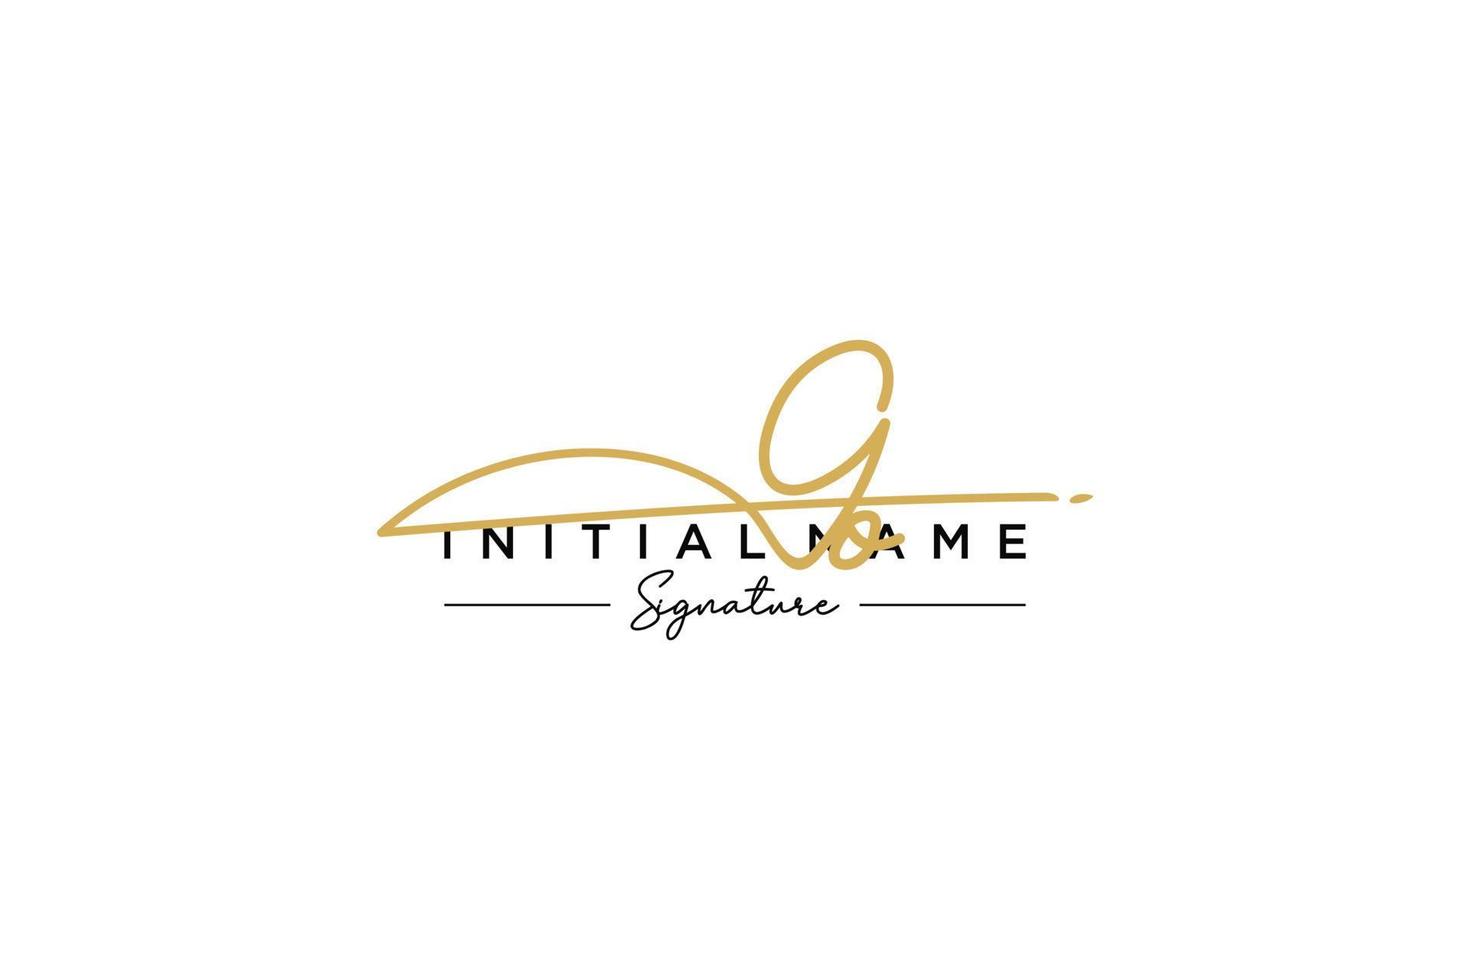 Initial GO signature logo template vector. Hand drawn Calligraphy lettering Vector illustration.